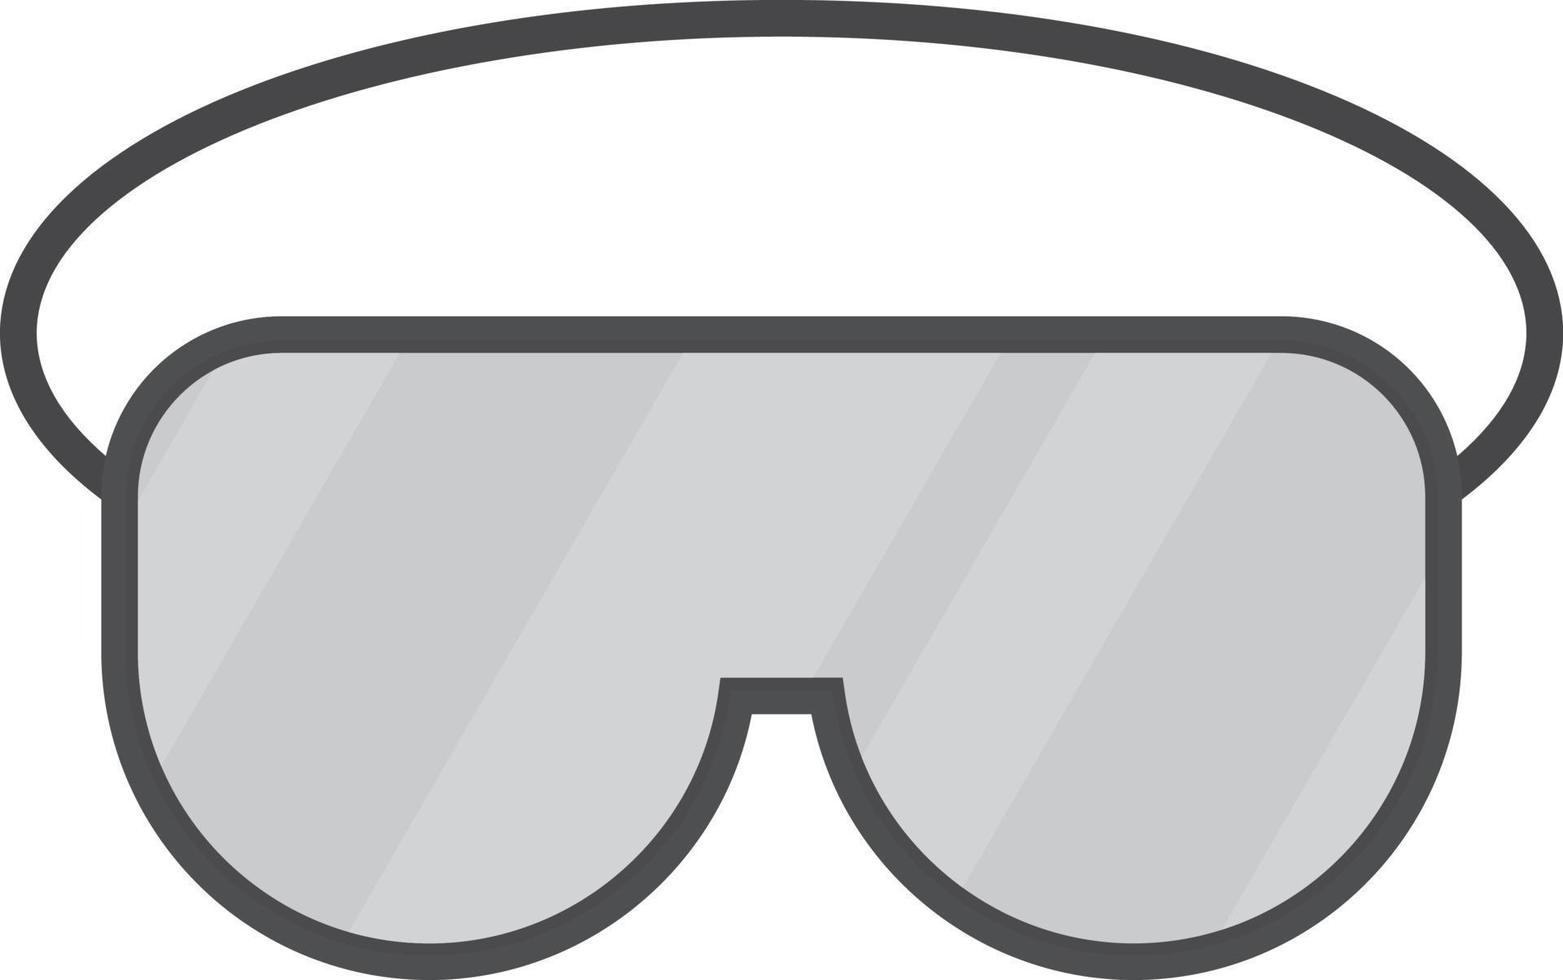 Lab Glasses Flat Greyscale vector